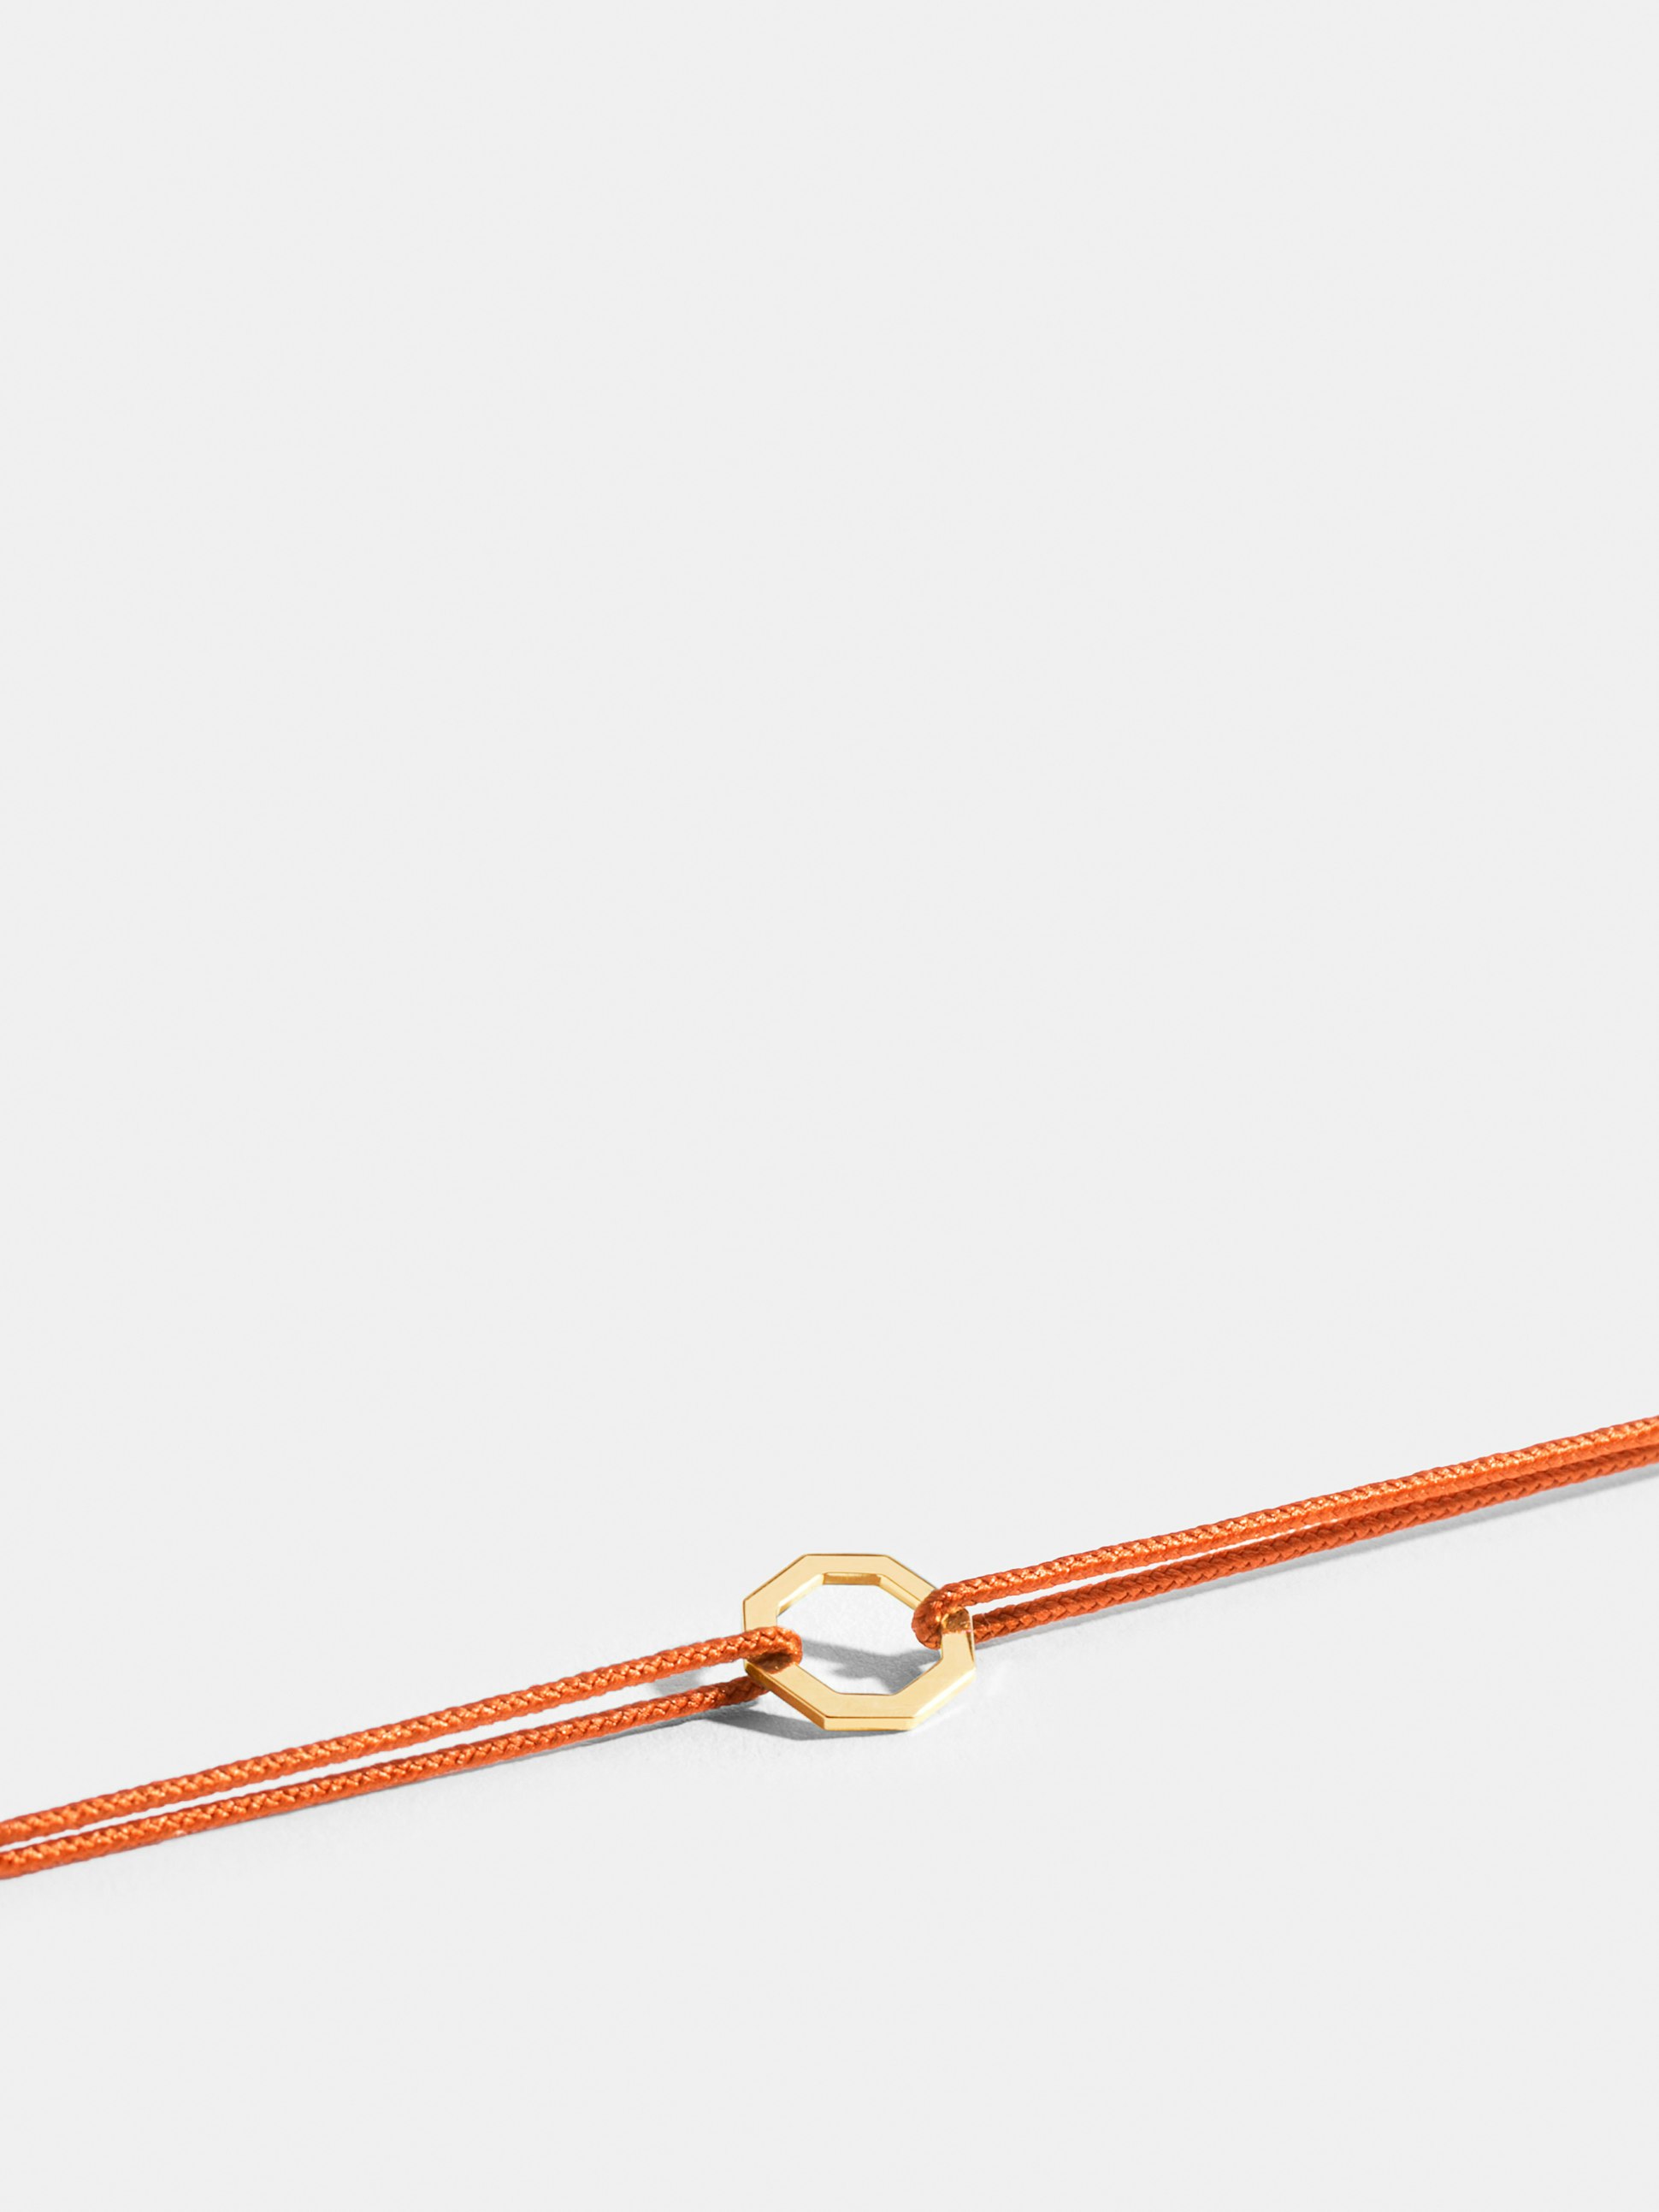 Octogone motif in 18k Fairmined ethical yellow gold, on a bright orange cord. 